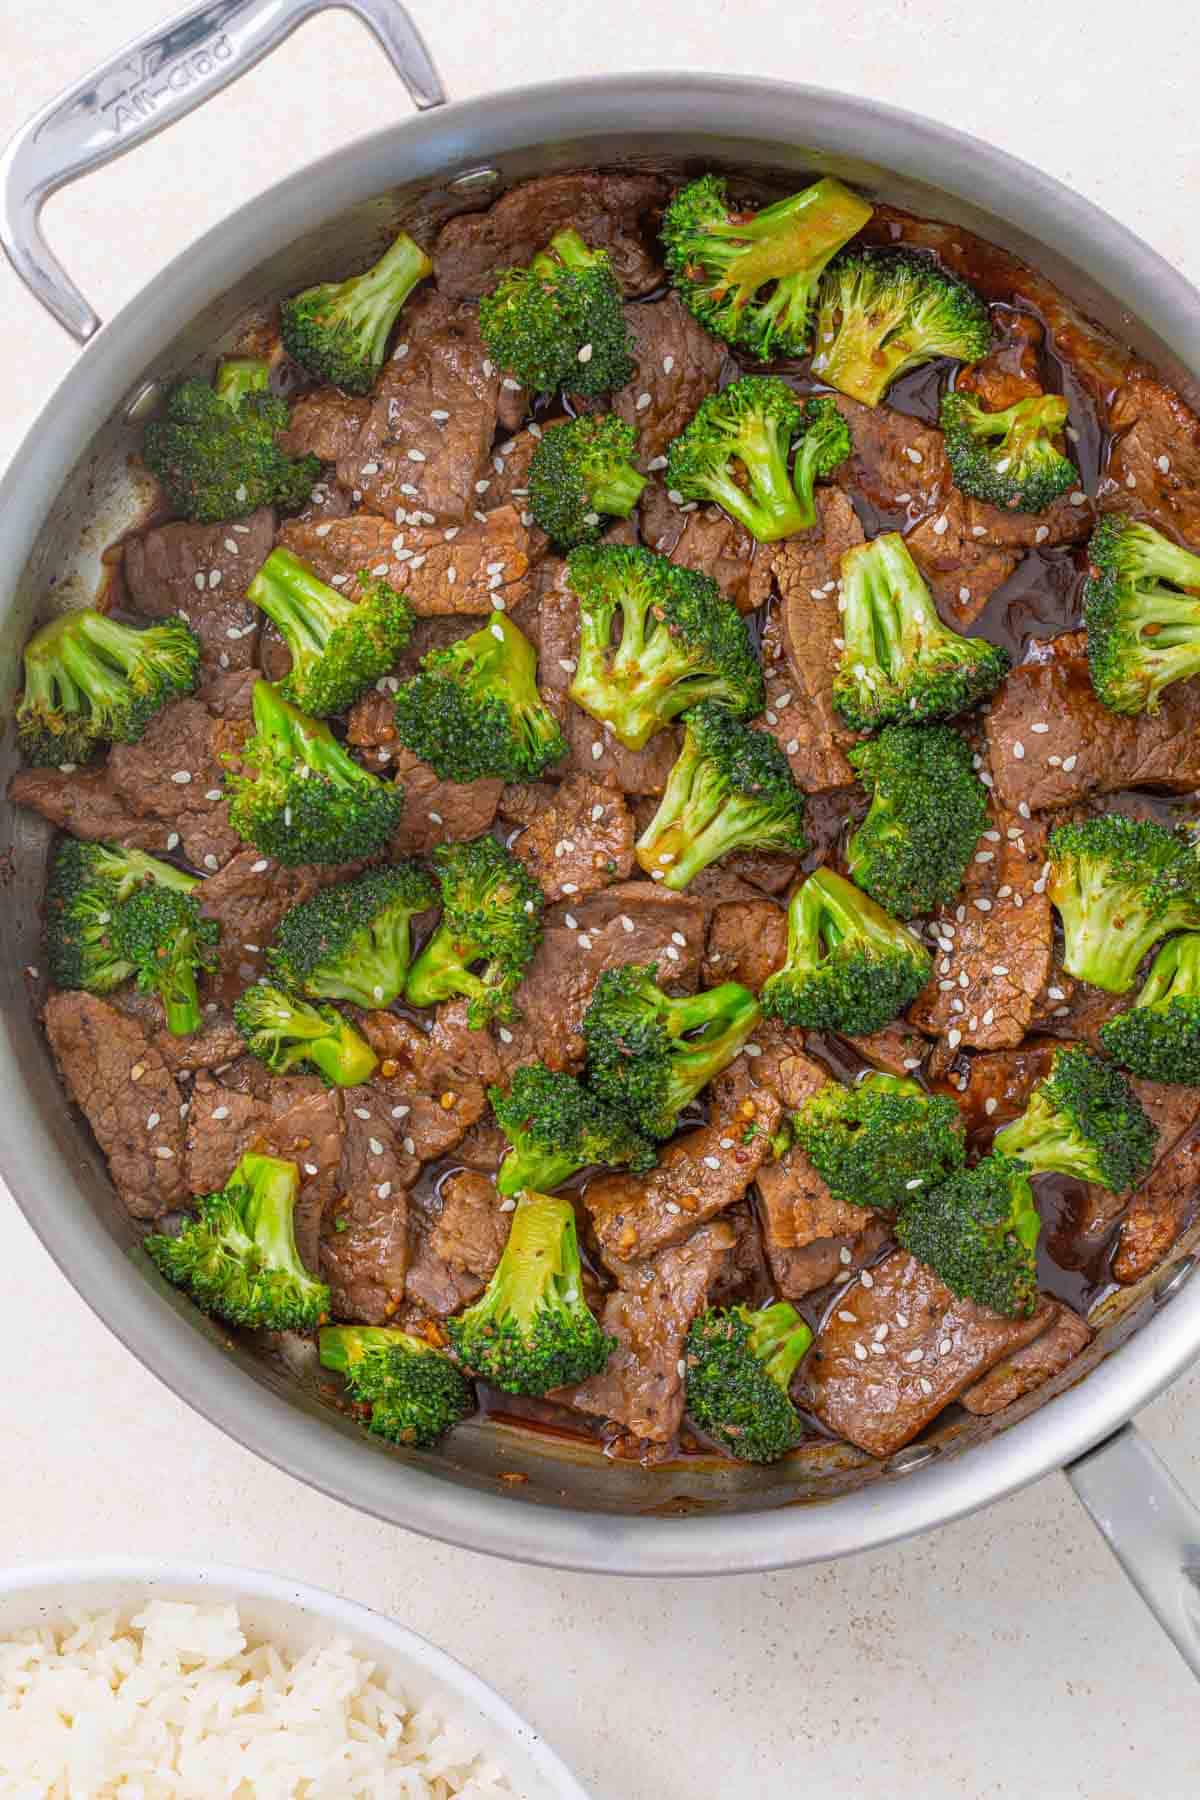 Beef and broccoli stir-fry in a sauté pan beside a bowl of white rice.